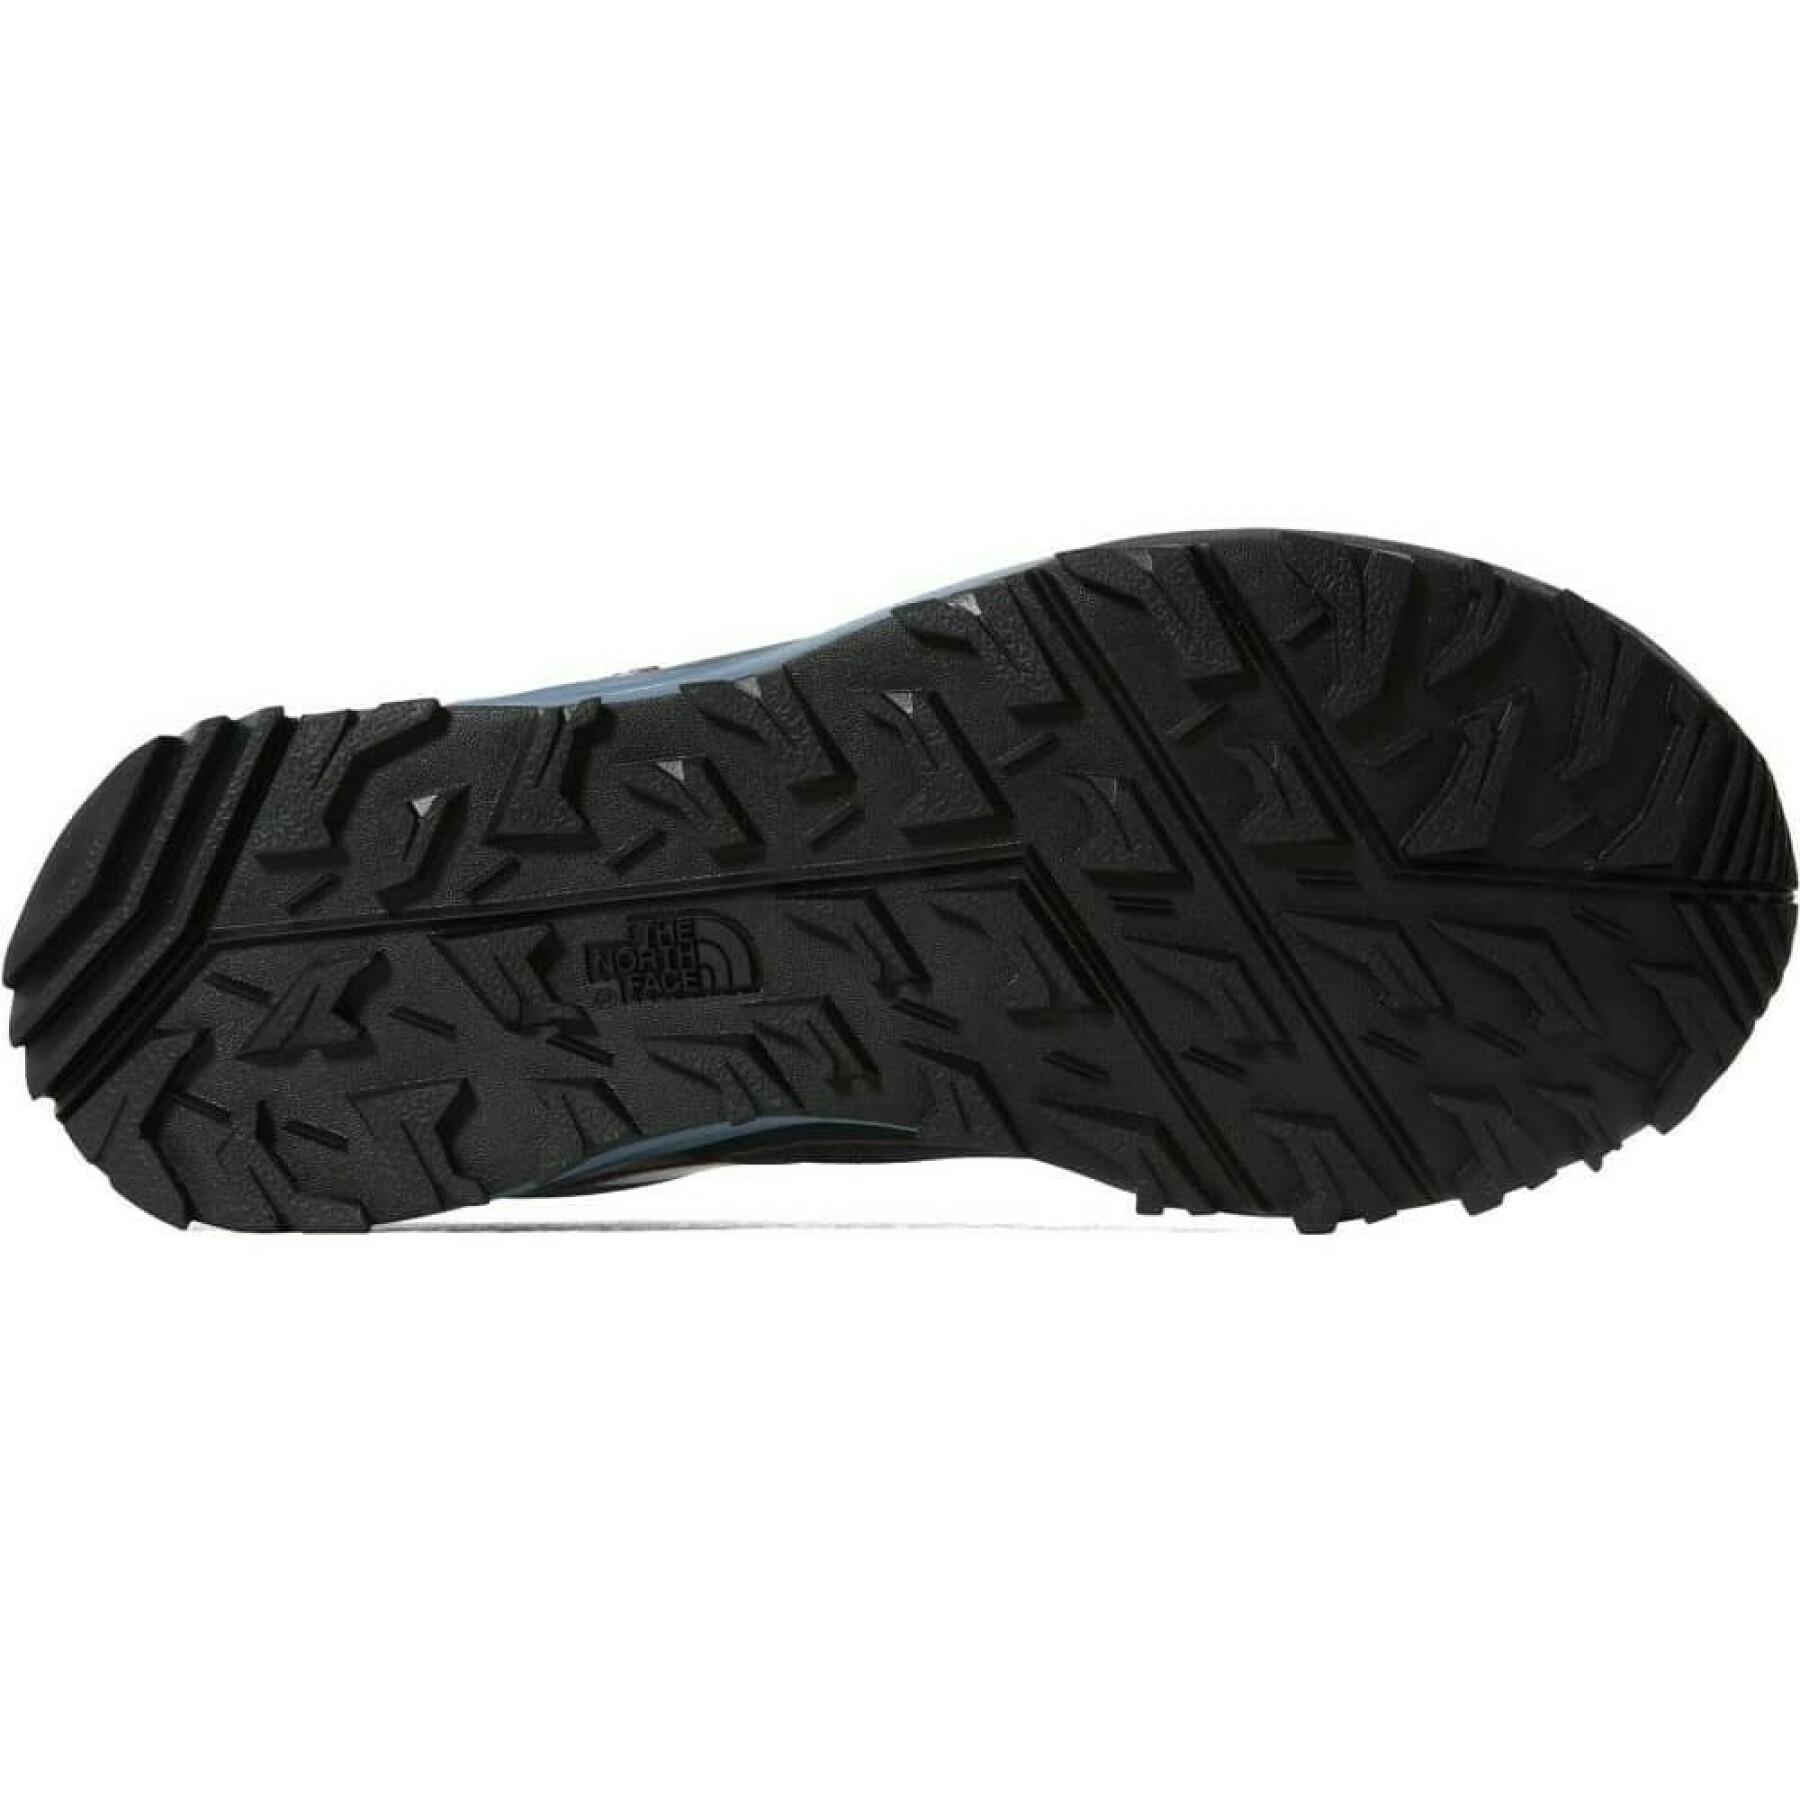 Women's walking shoes The North Face Litewave futurelight™